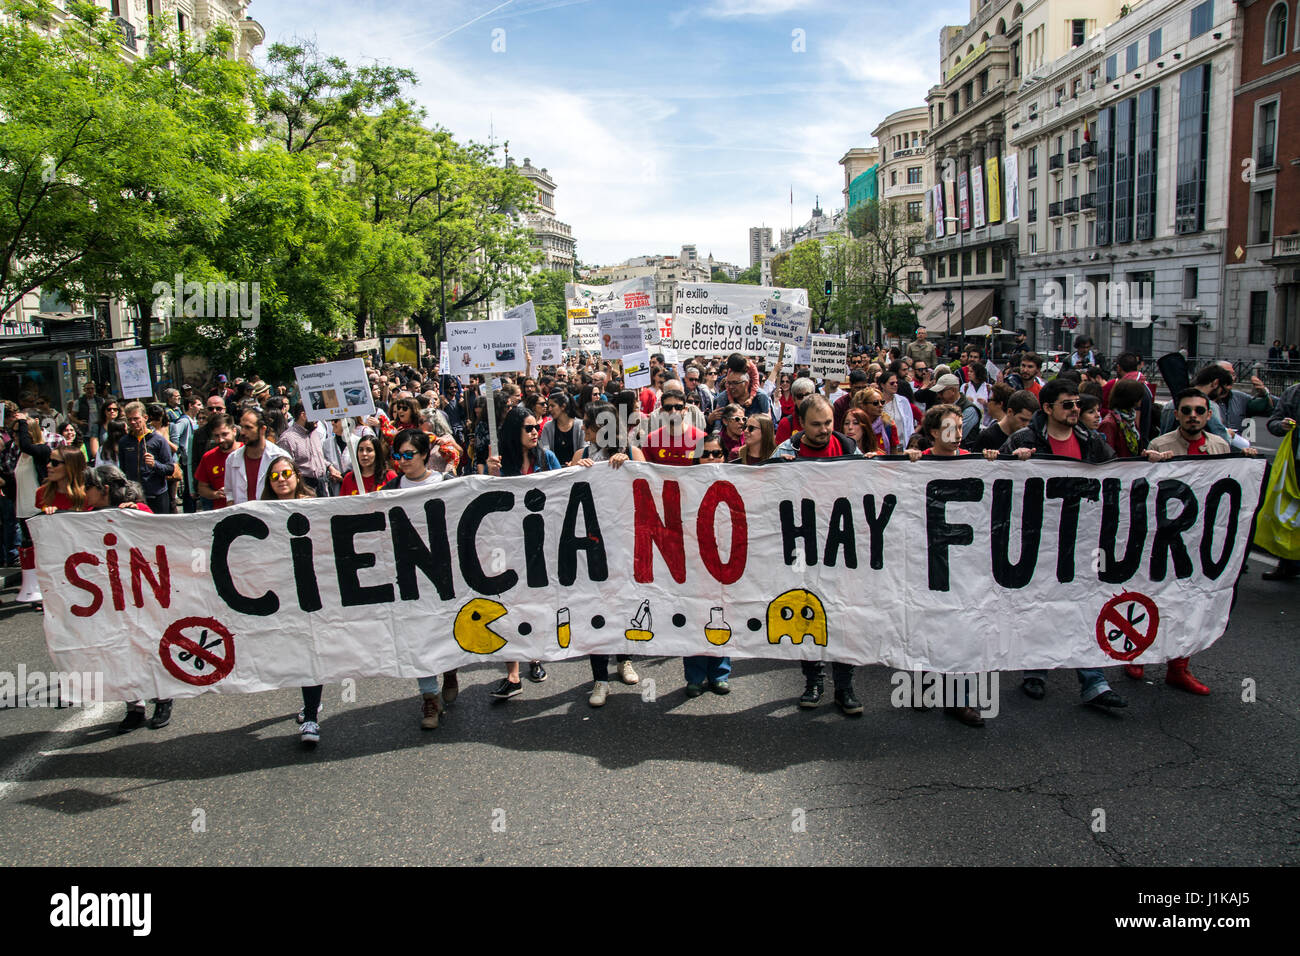 Madrid, Spain. 22nd April, 2017. A banner that reads 'No future without science' where researchers and scientist protest against budget cuts in science during the March for Science in Madrid, Spain. Credit: Marcos del Mazo/Alamy Live News Stock Photo